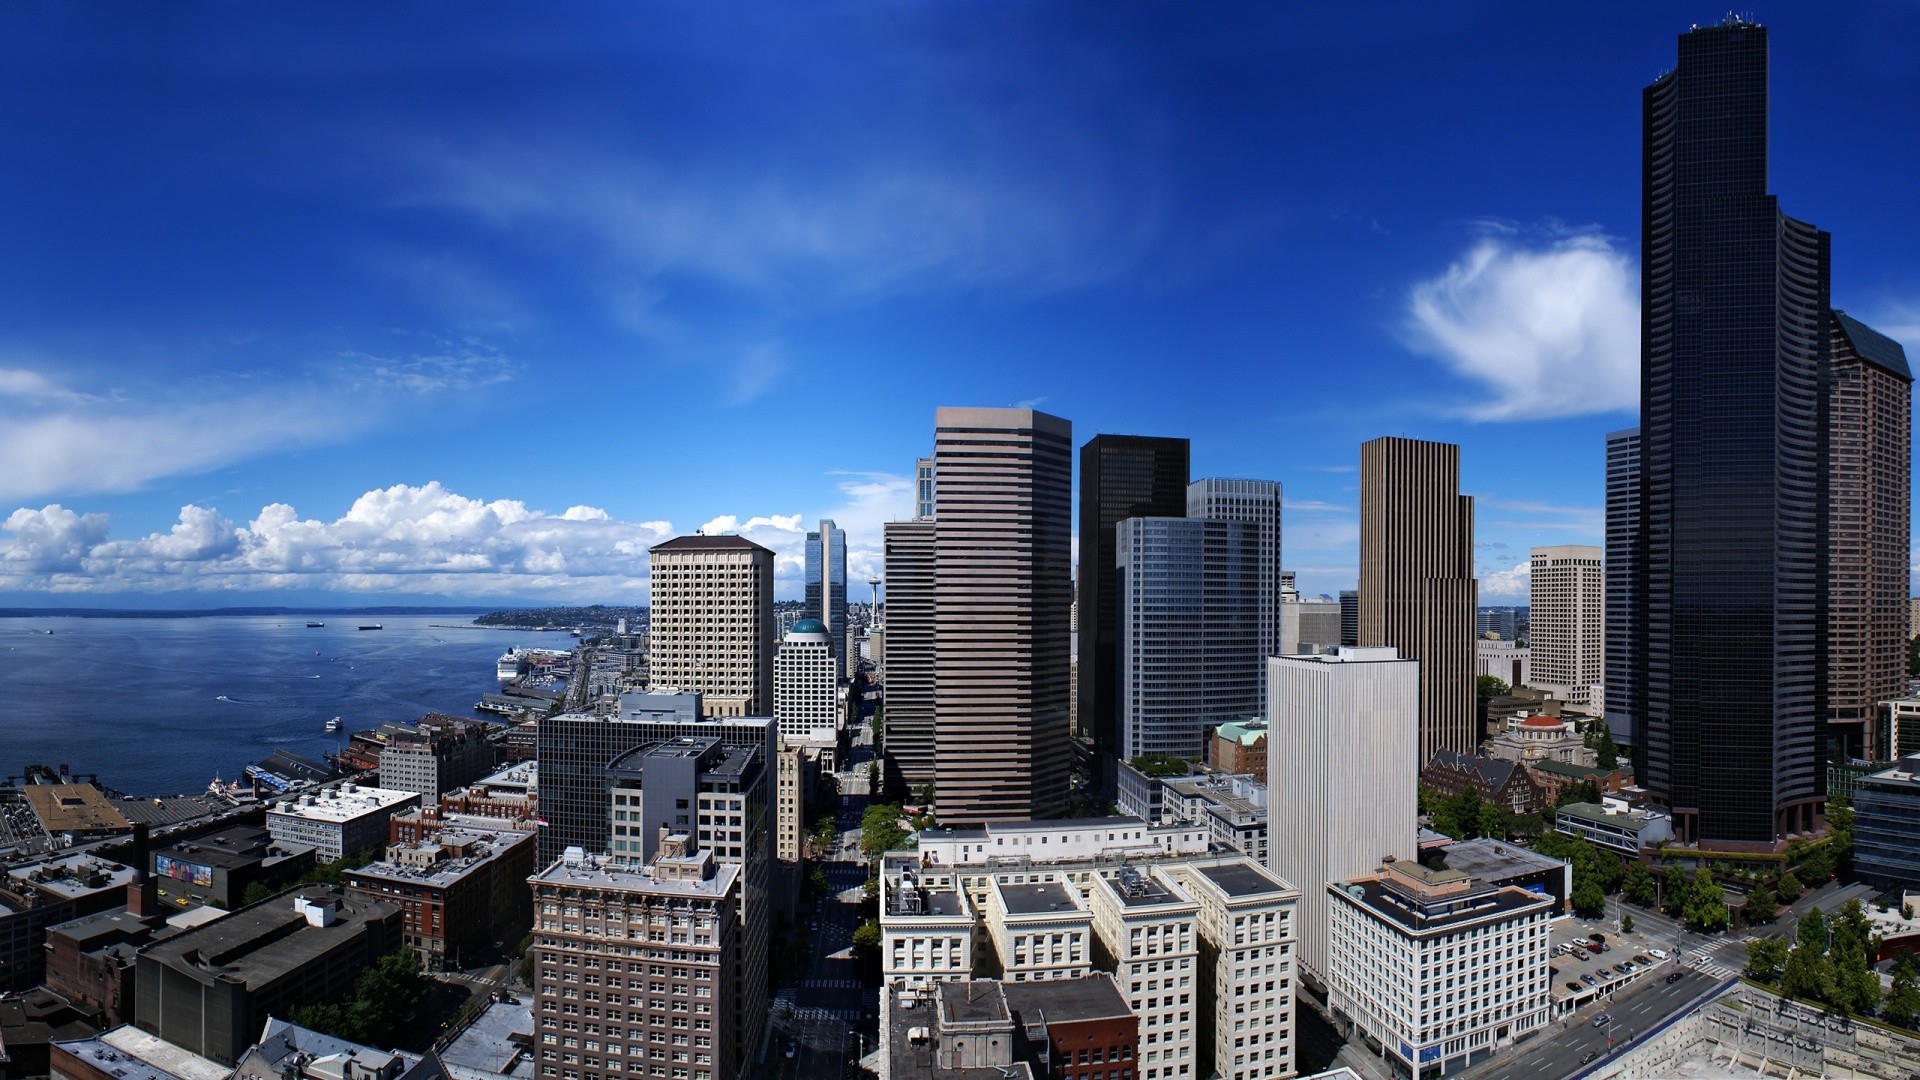 cityscapes, Grunge, Seattle, Tagnotallowedtoosubjective, Cities Wallpaper